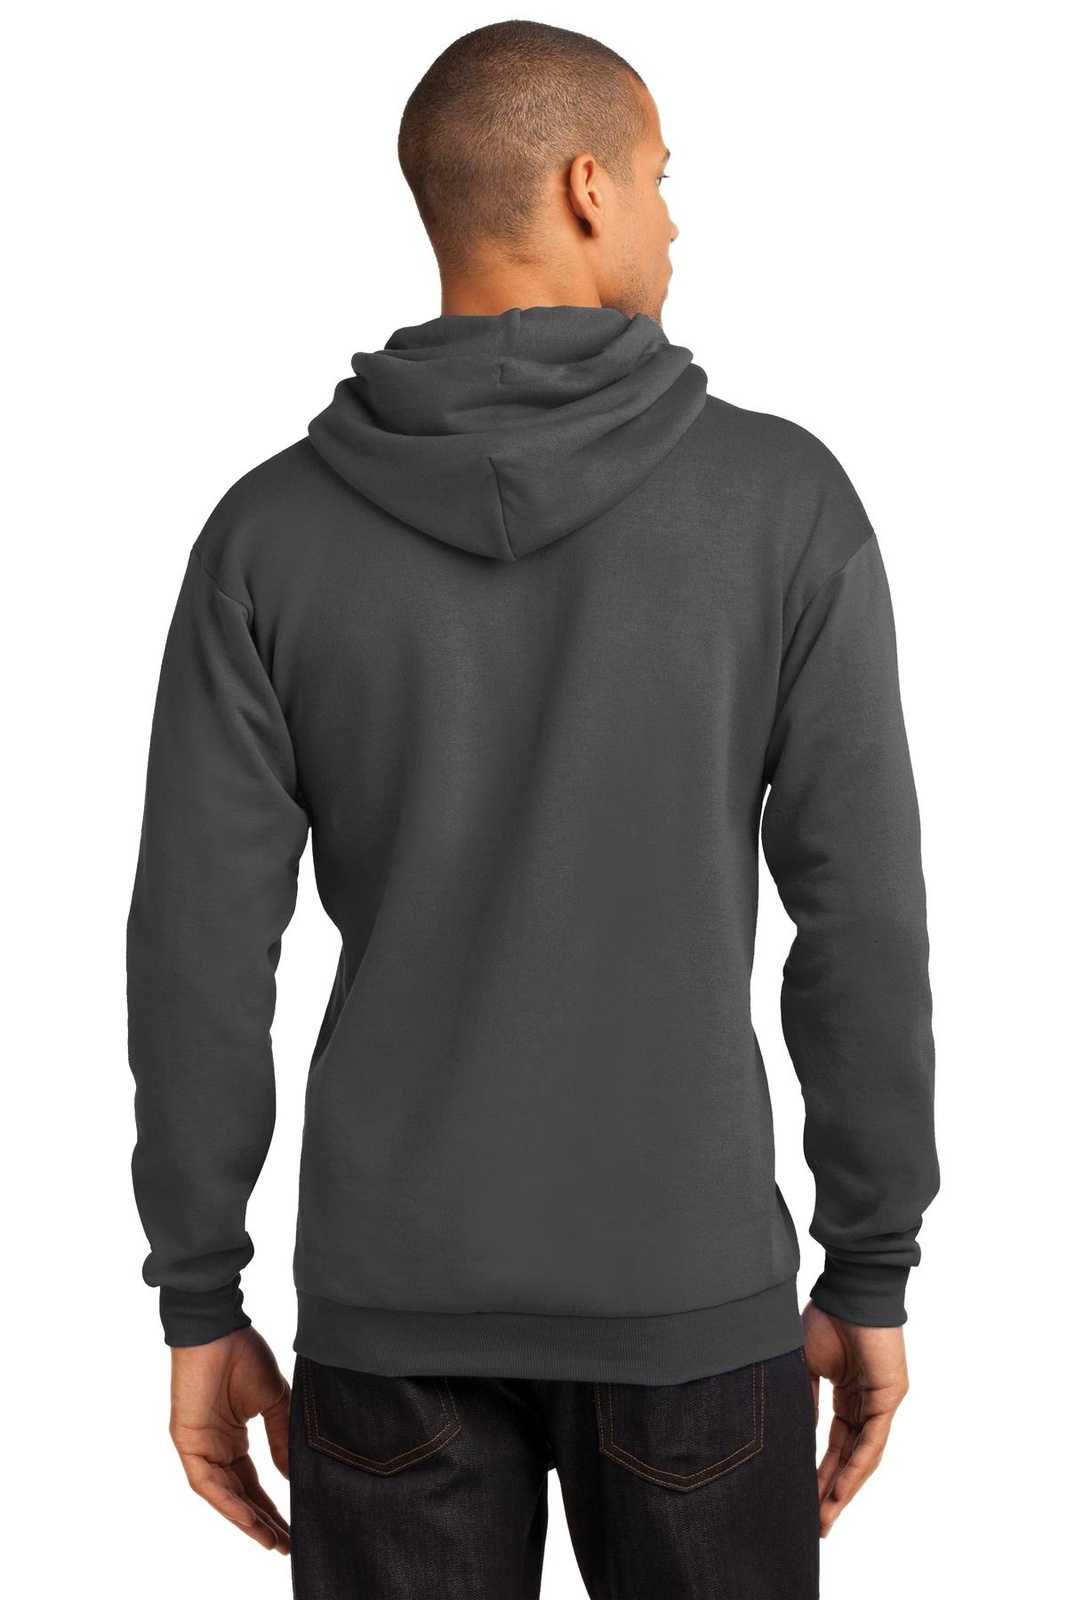 Port & Company PC78H Core Fleece Pullover Hooded Sweatshirt - Charcoal - HIT a Double - 1